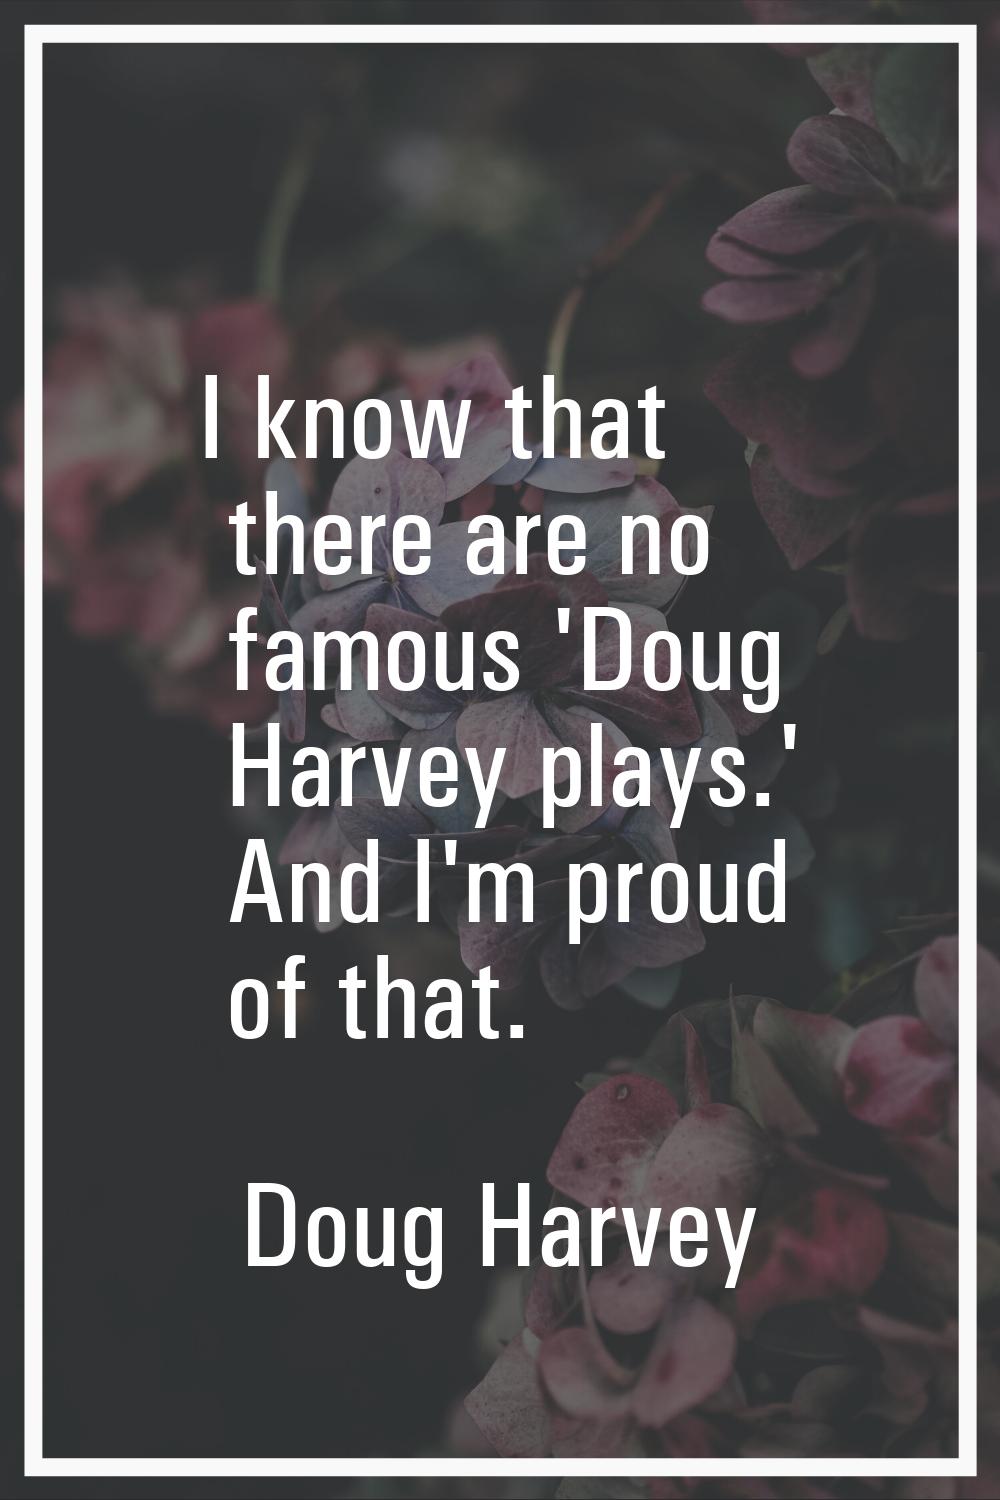 I know that there are no famous 'Doug Harvey plays.' And I'm proud of that.